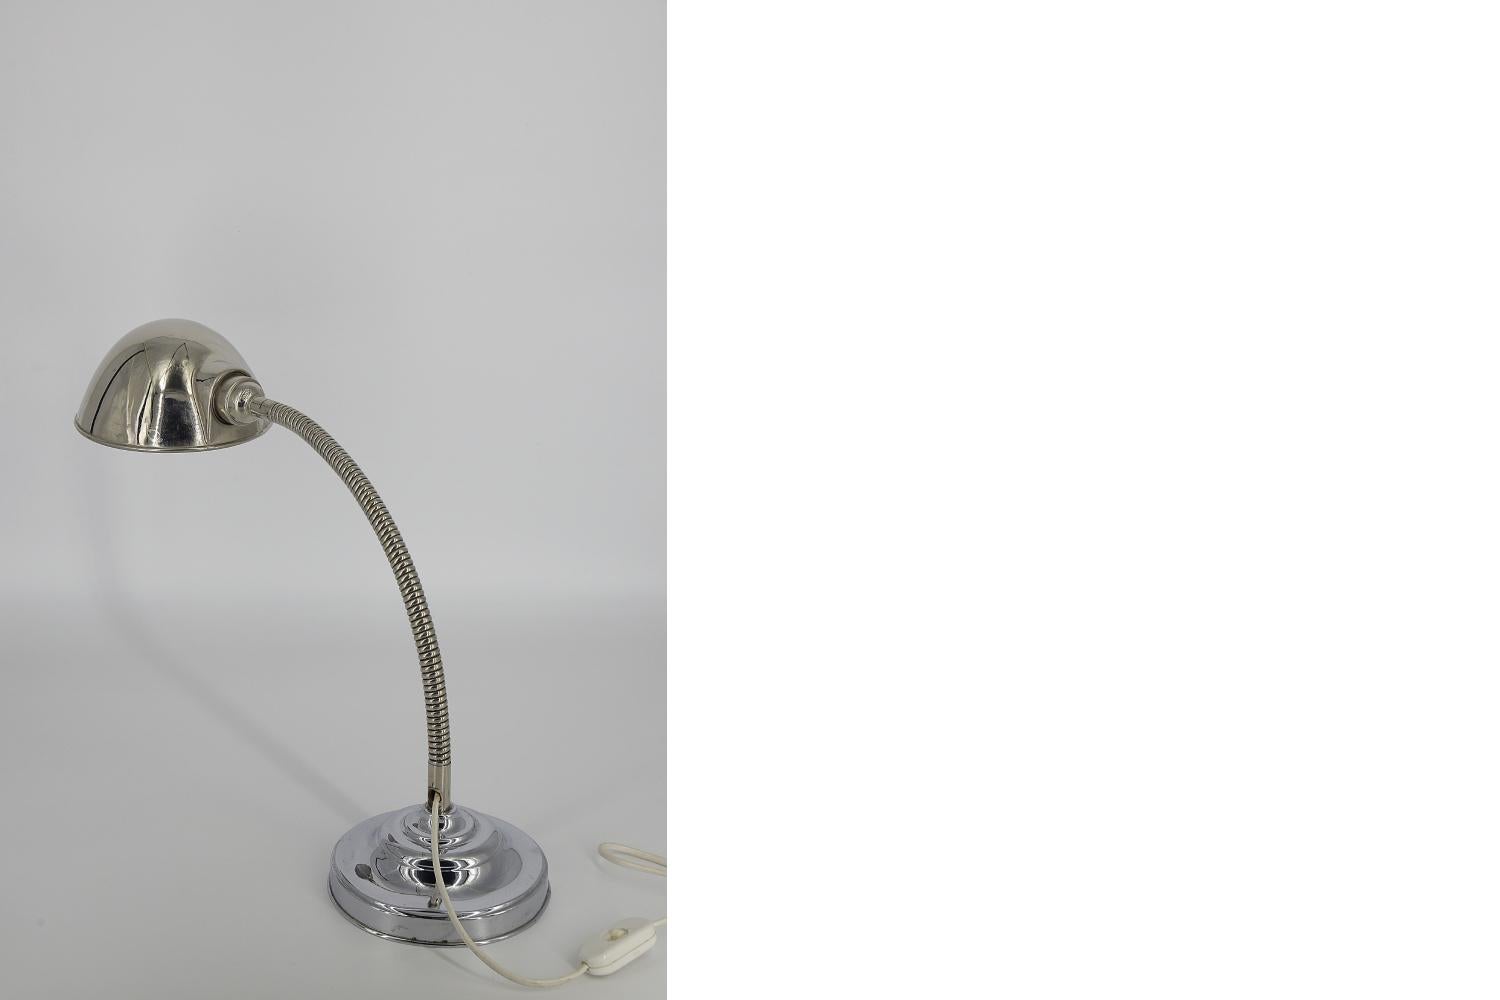 This classic desk lamp was produced in Scandinavia during the 1960s. It has elements of the German manufacturer of electrotechnical elements Vossloh Werke Zenith. The lamp has a solid, chrome base with a flexible arm and a parabolic diffuser. The